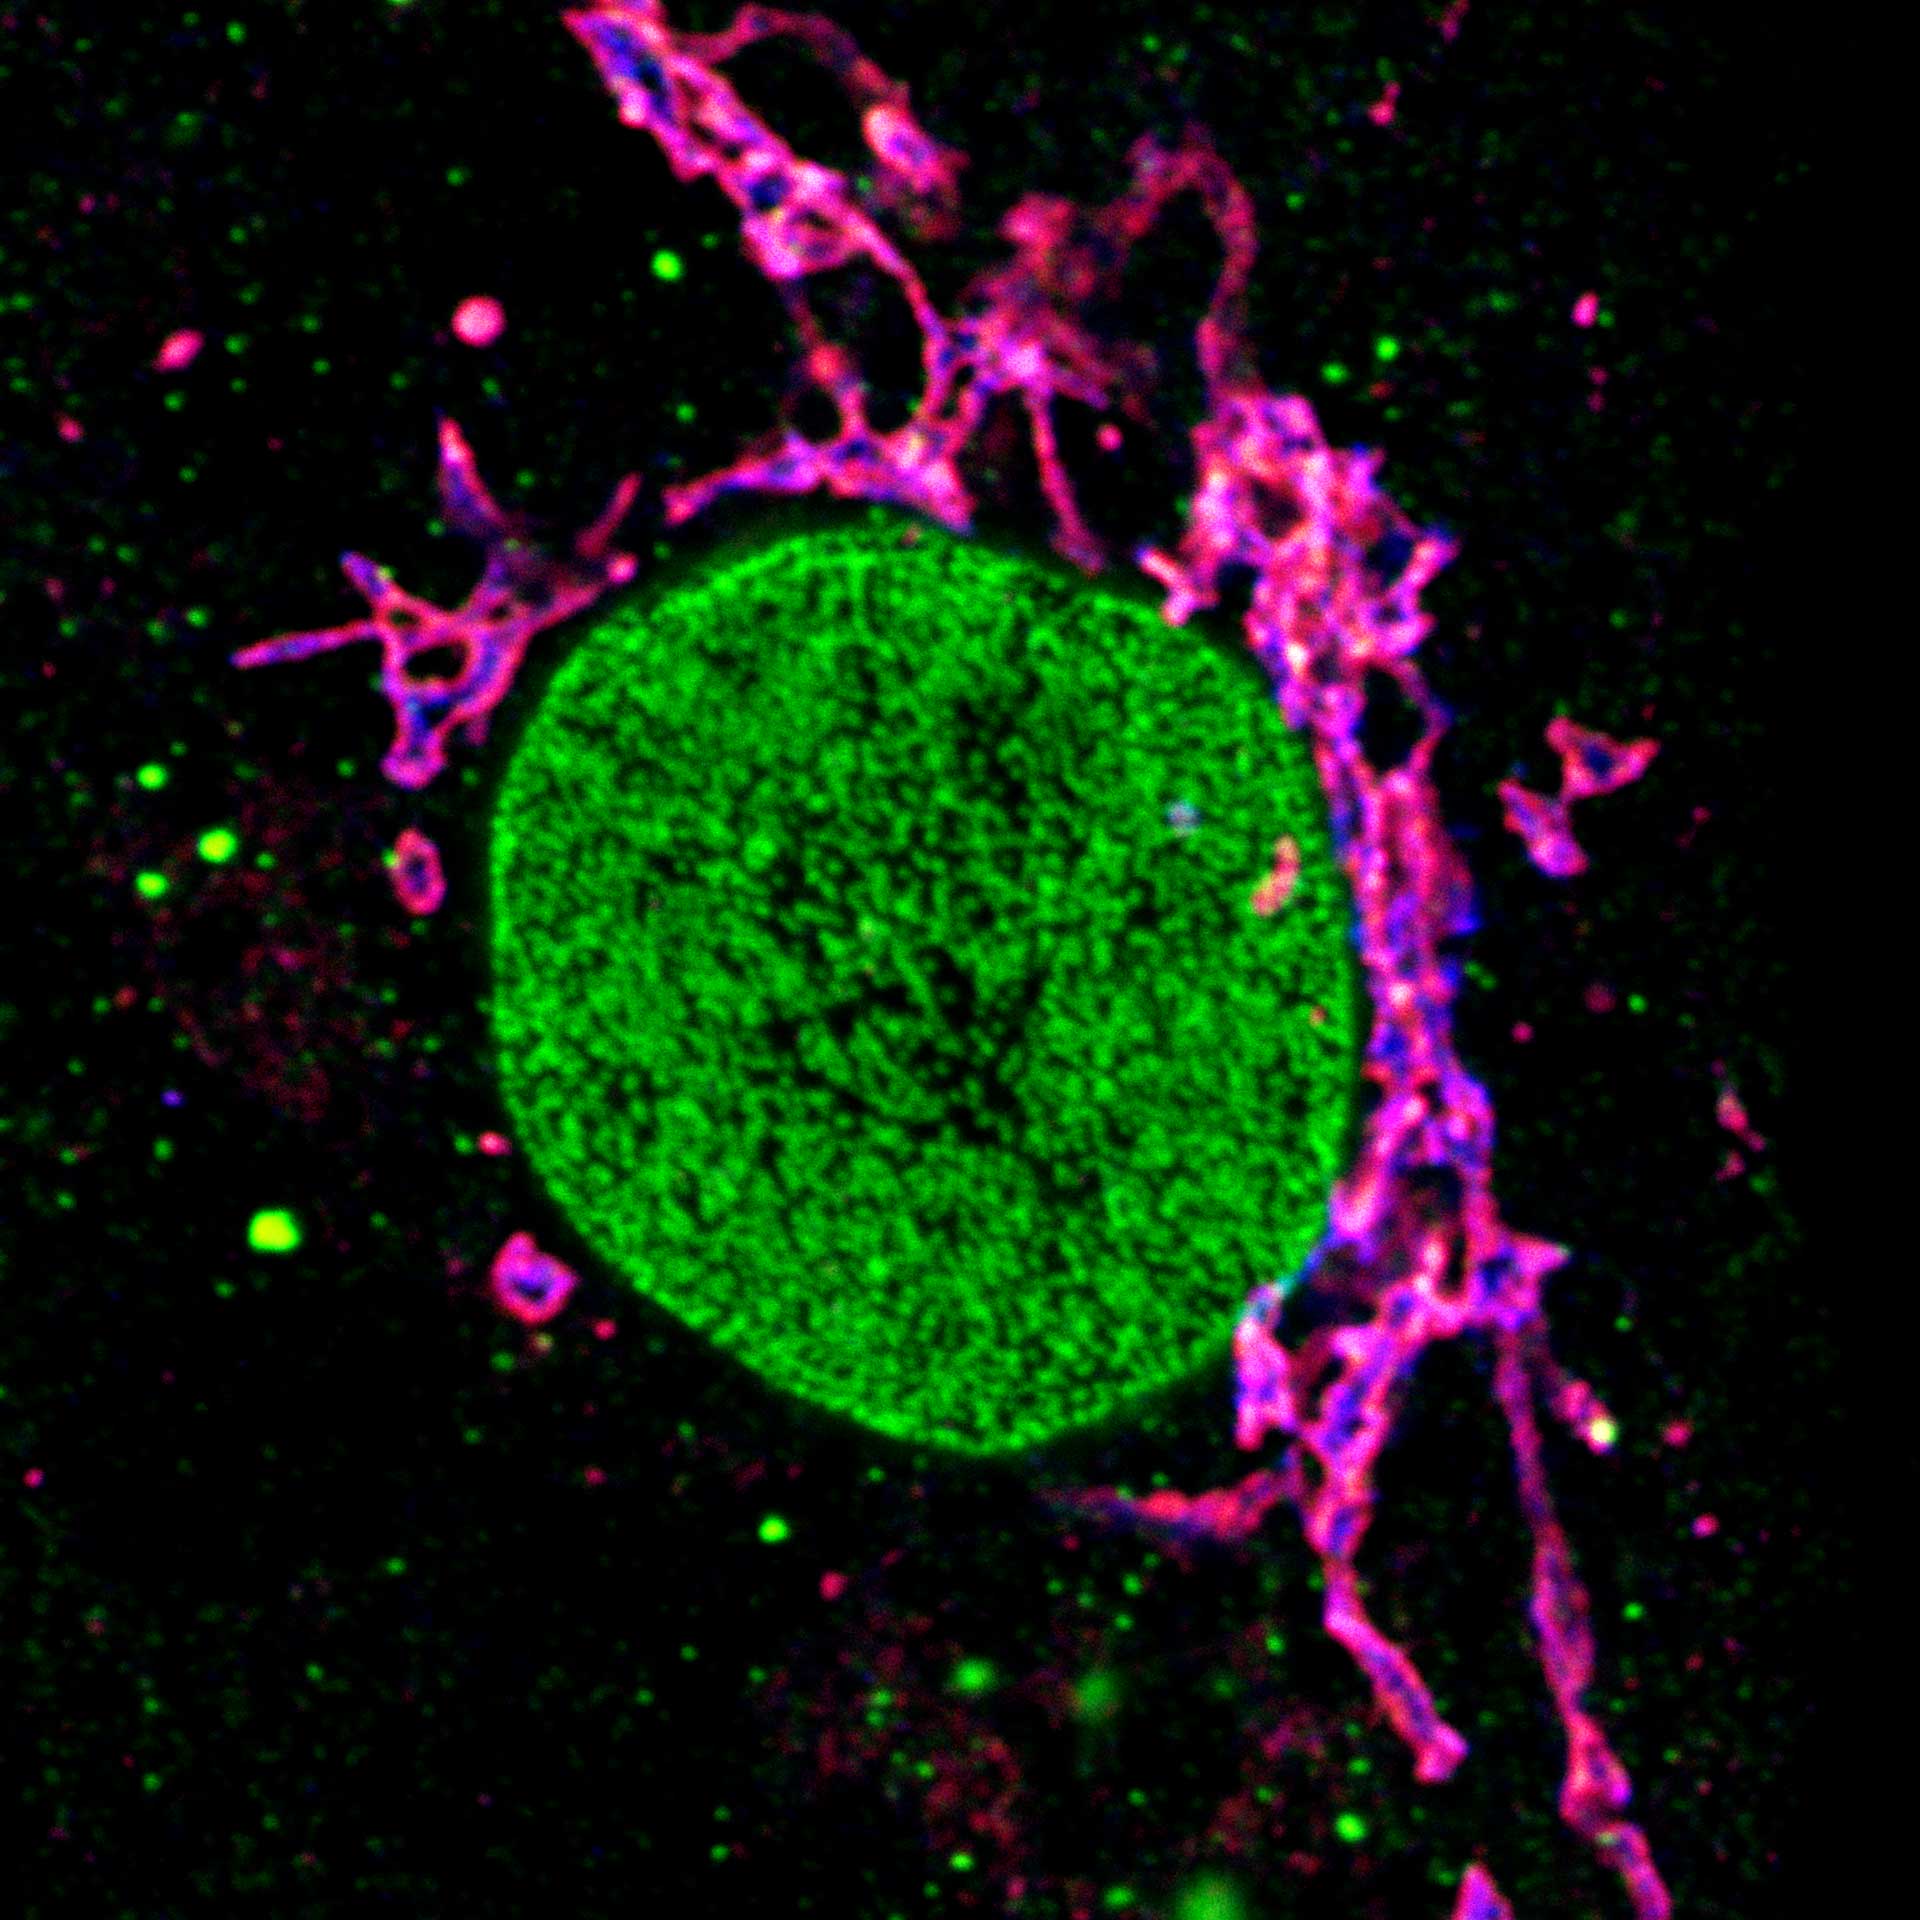 Three color STED and confocal image of a mammalian cultured cell immunostained for a nuclear pore protein in green and two golgi apparatus markers in red and blue.